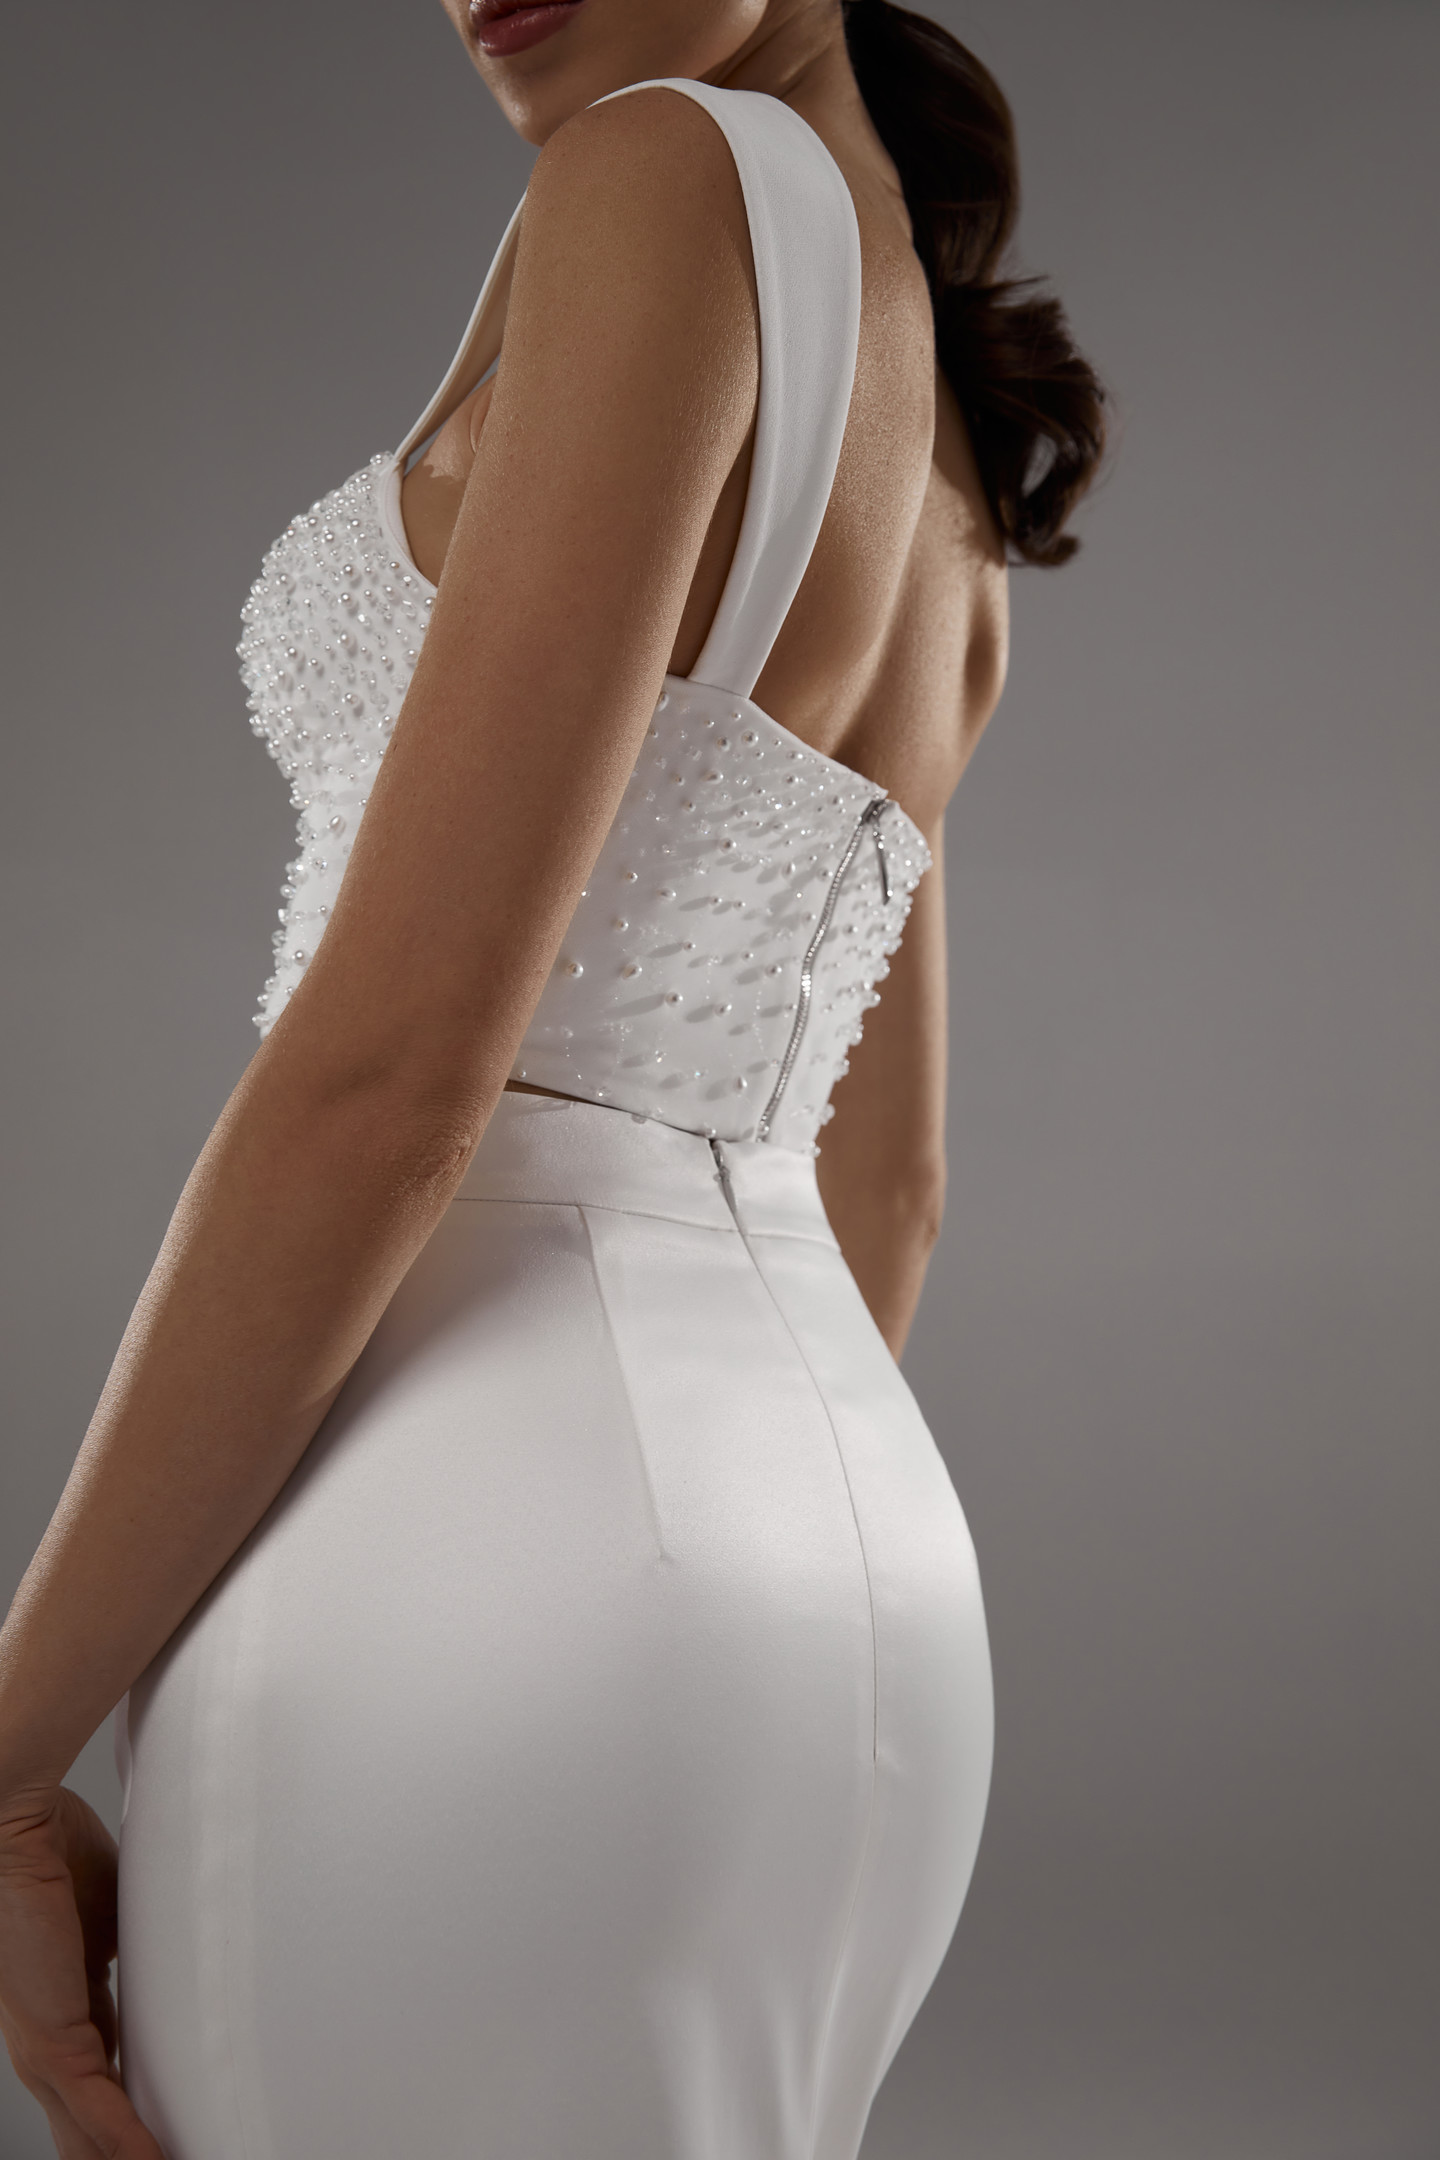 Beaded bustier, 2021, couture, top, bridal, off-white, bridal corset and skirt #3, embroidery